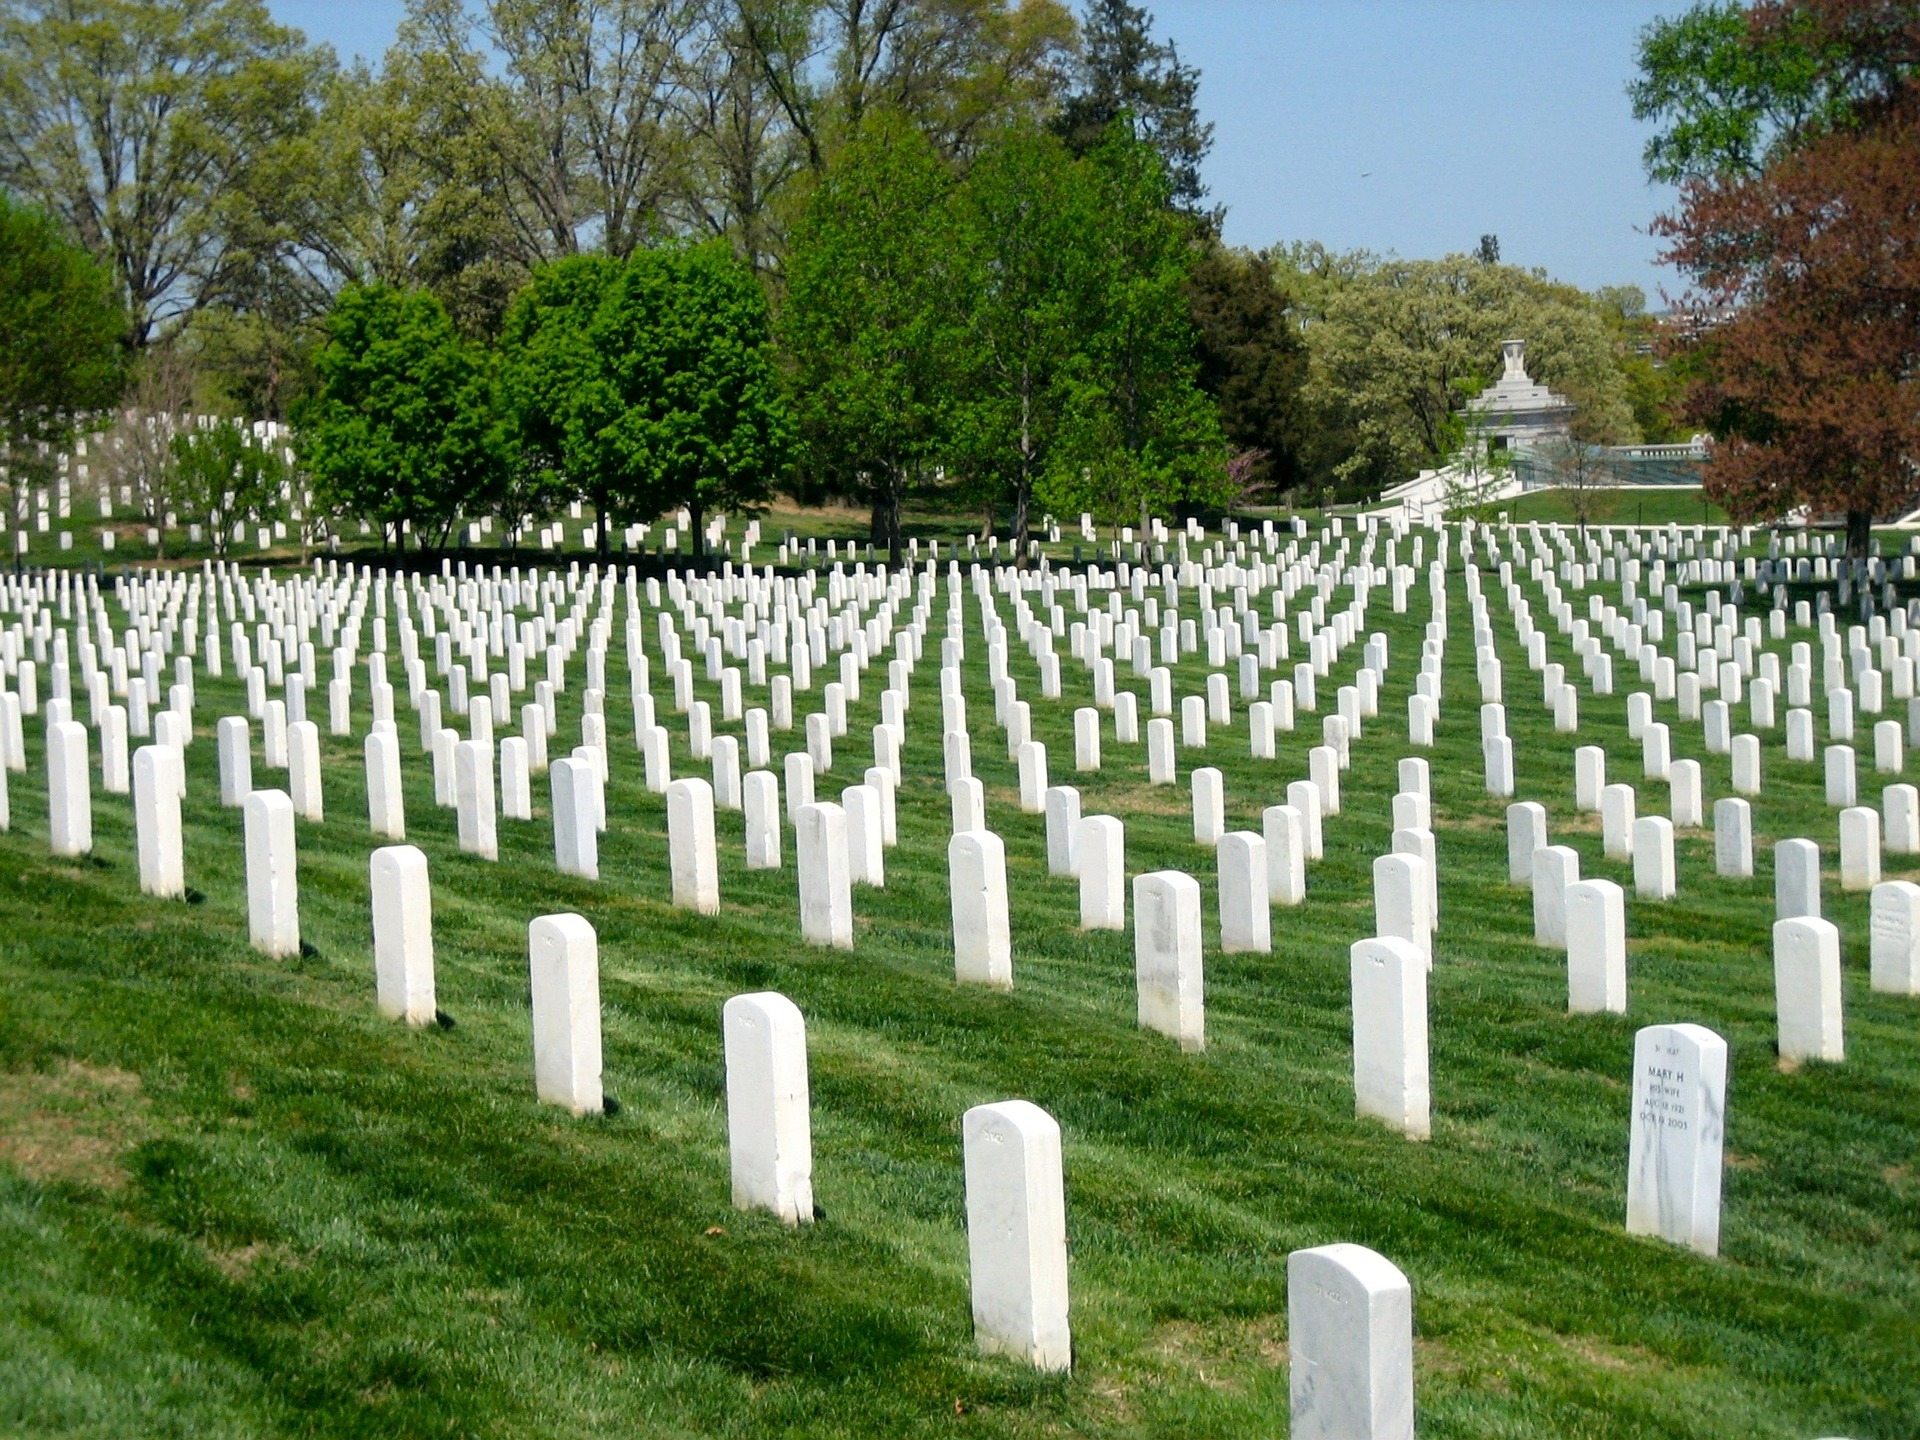 Rows of white headstones at Arlington National Cemetery